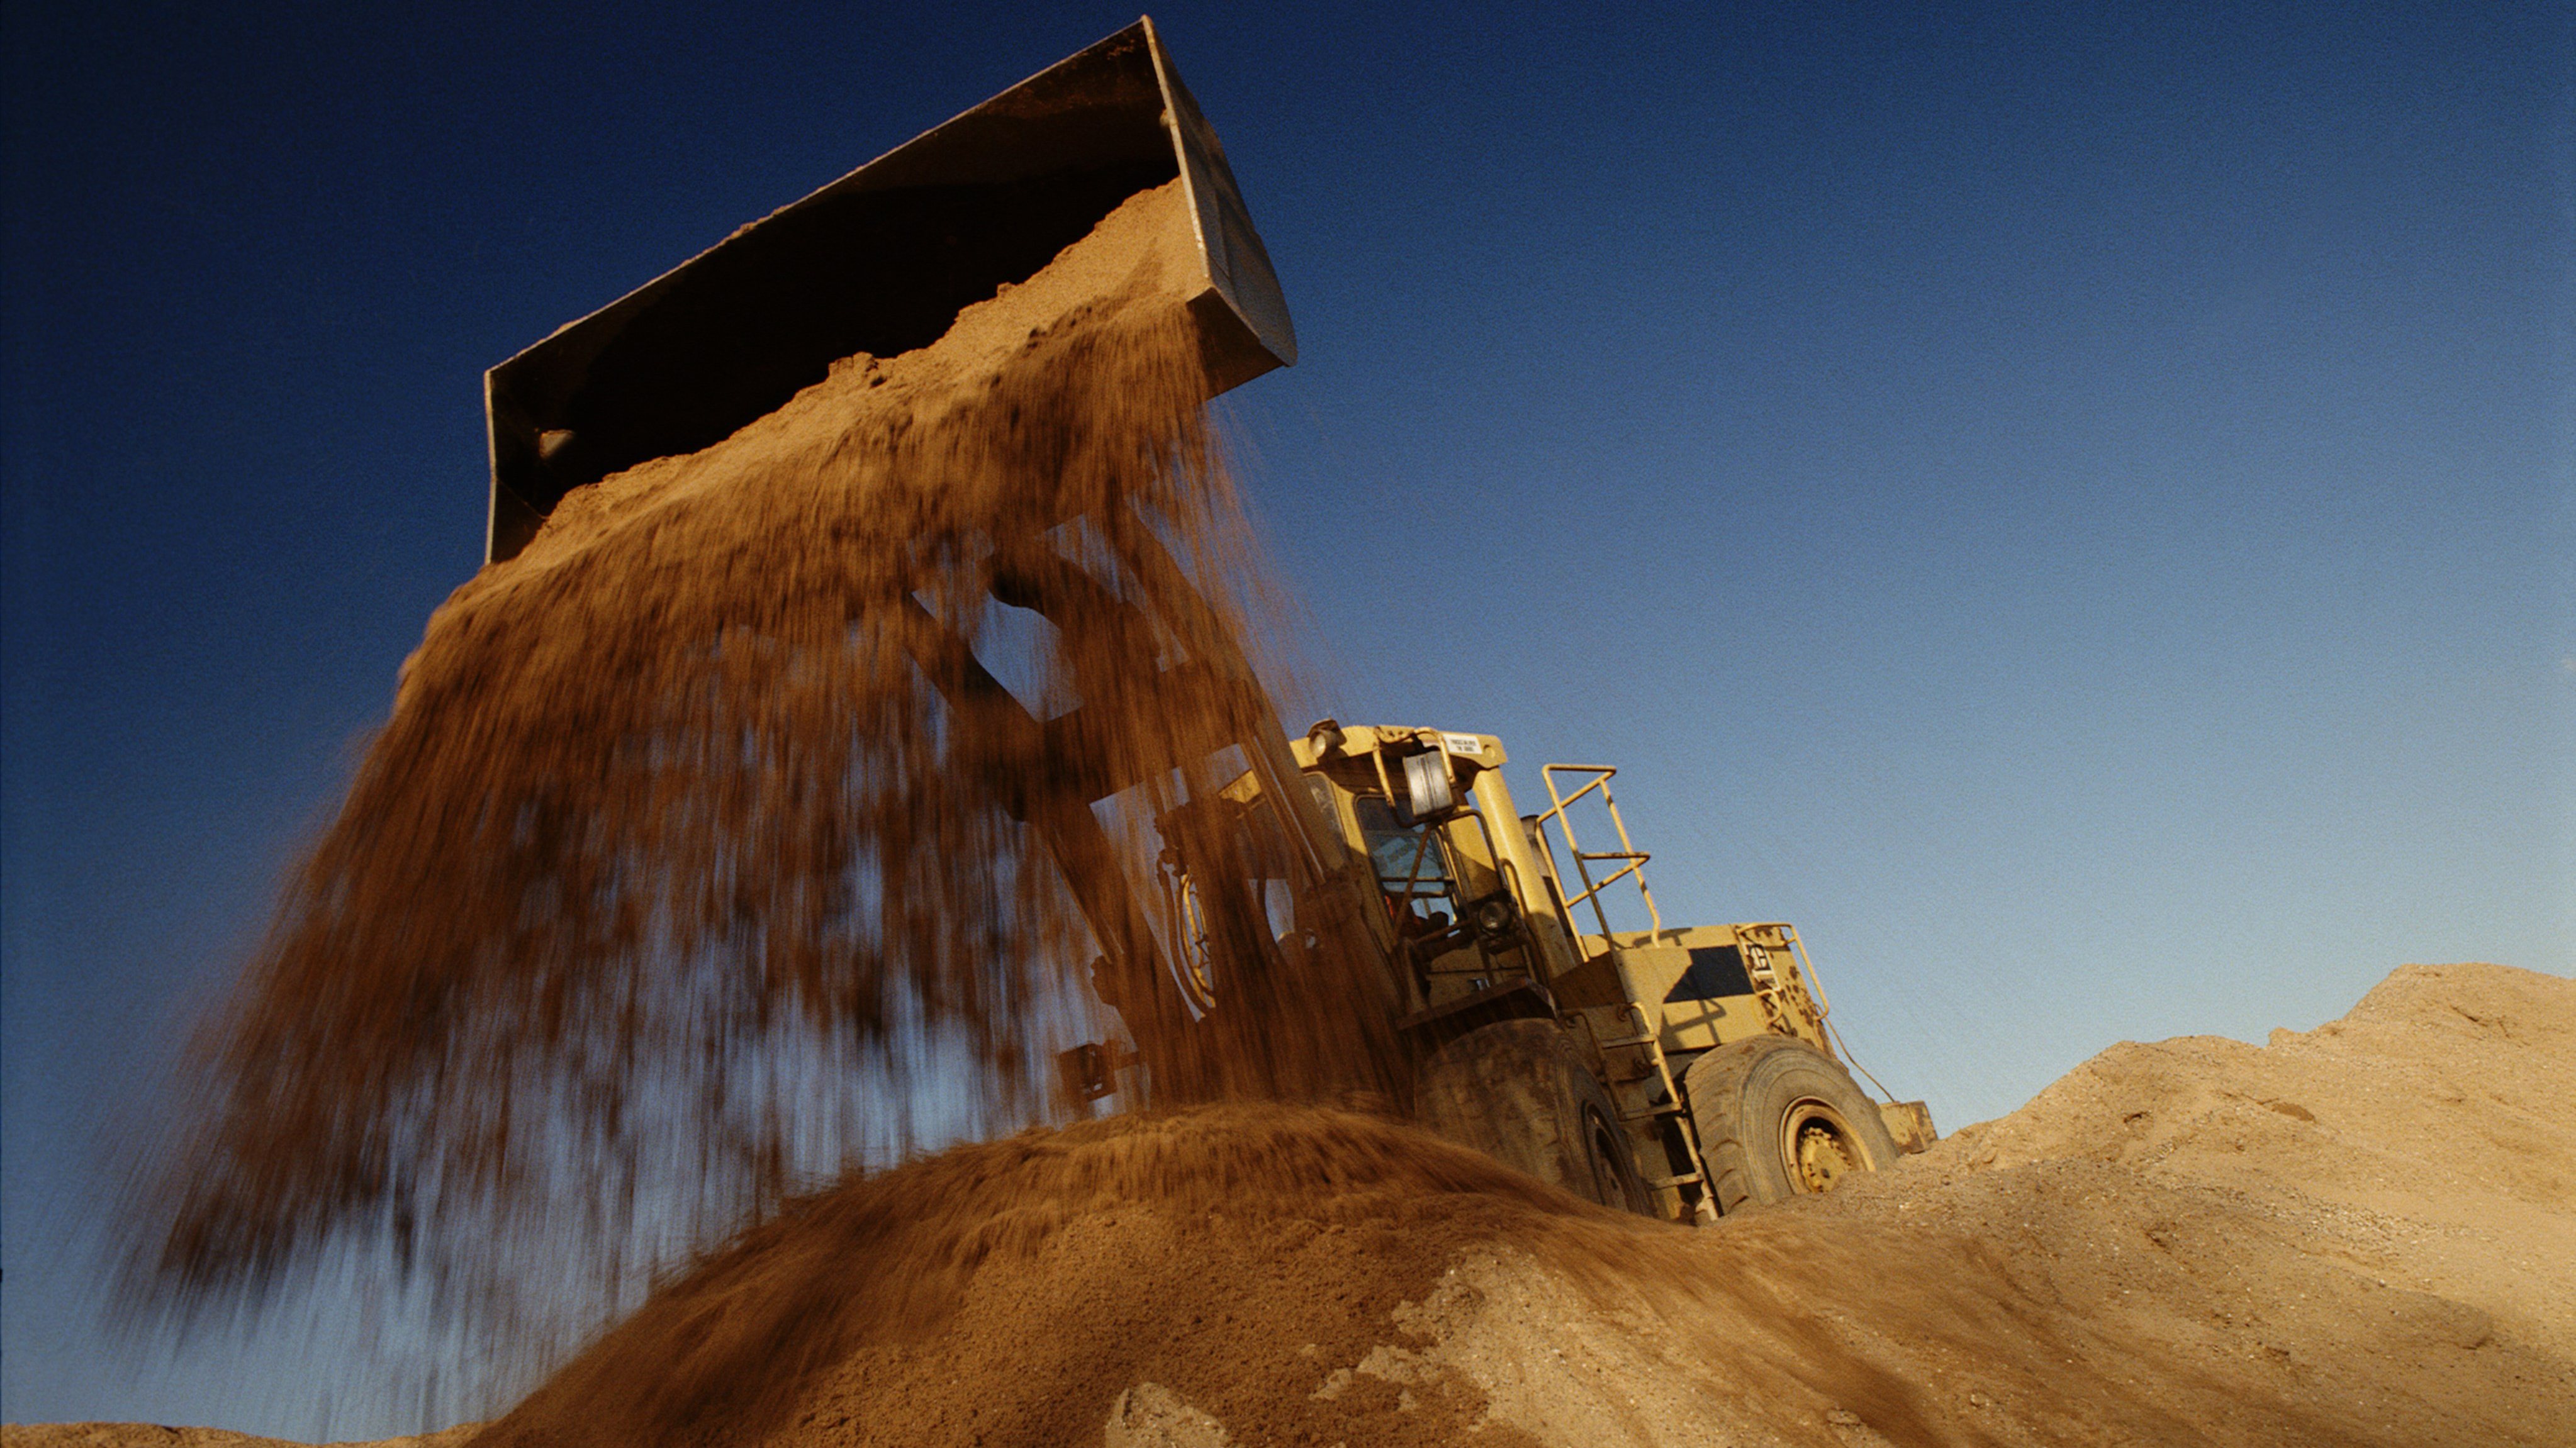 Earth mover in quarry dumping sand, low angle view